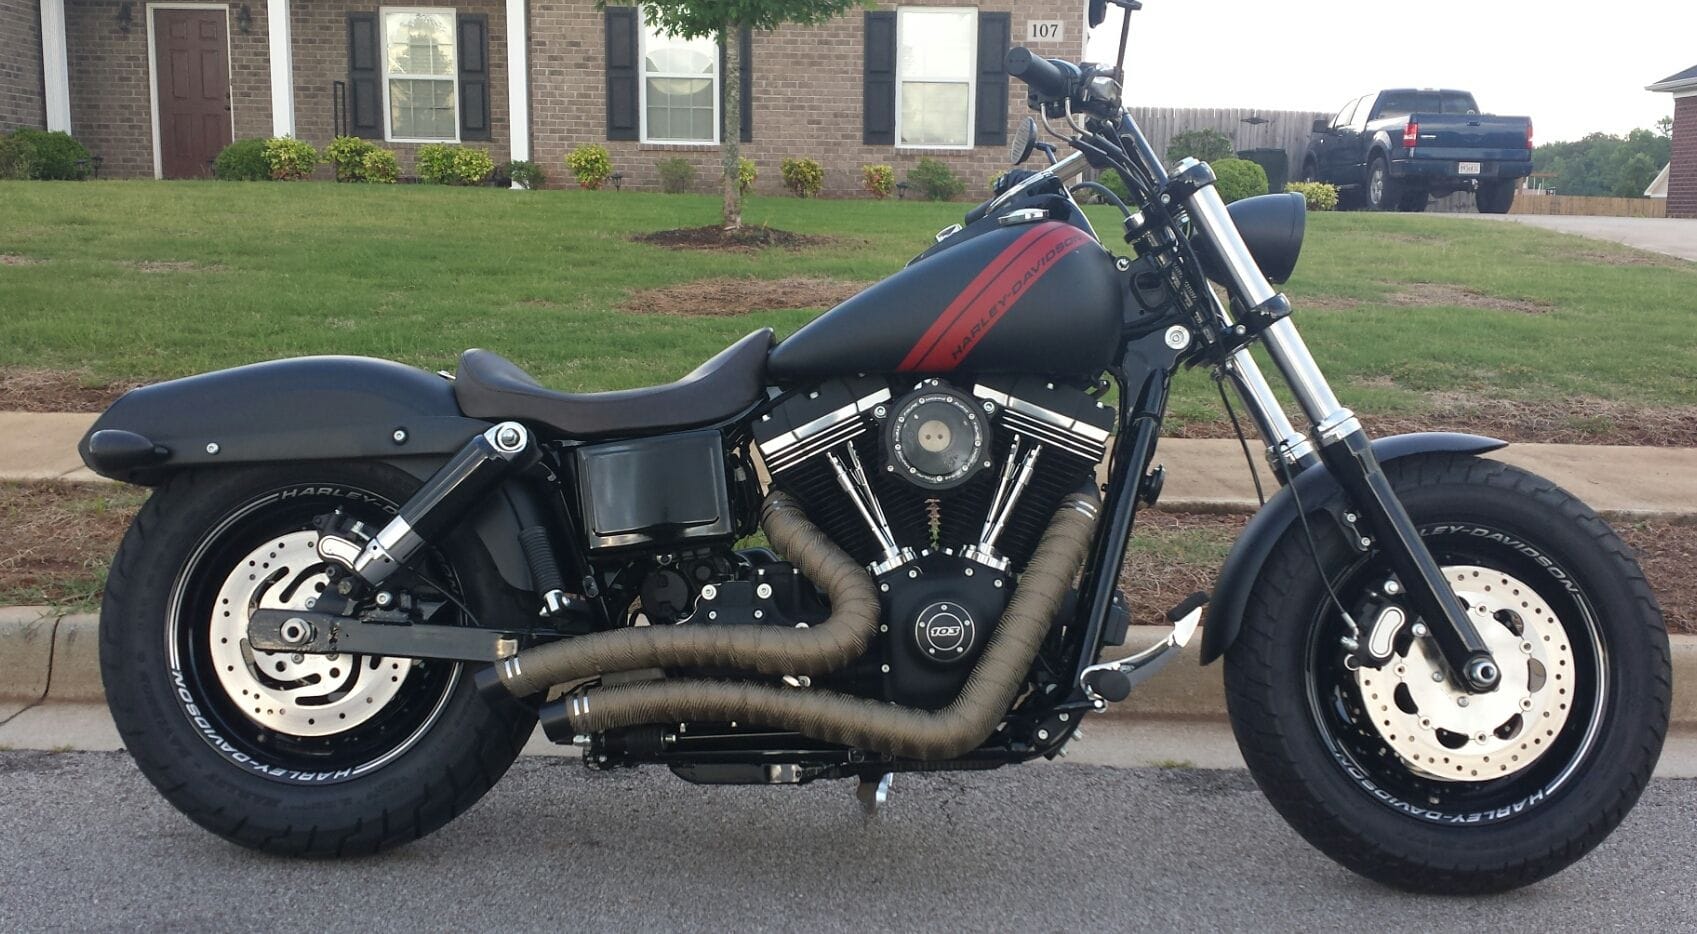 Fat Bob Squadron - owners check in! - Page 311 - Harley Davidson Forums